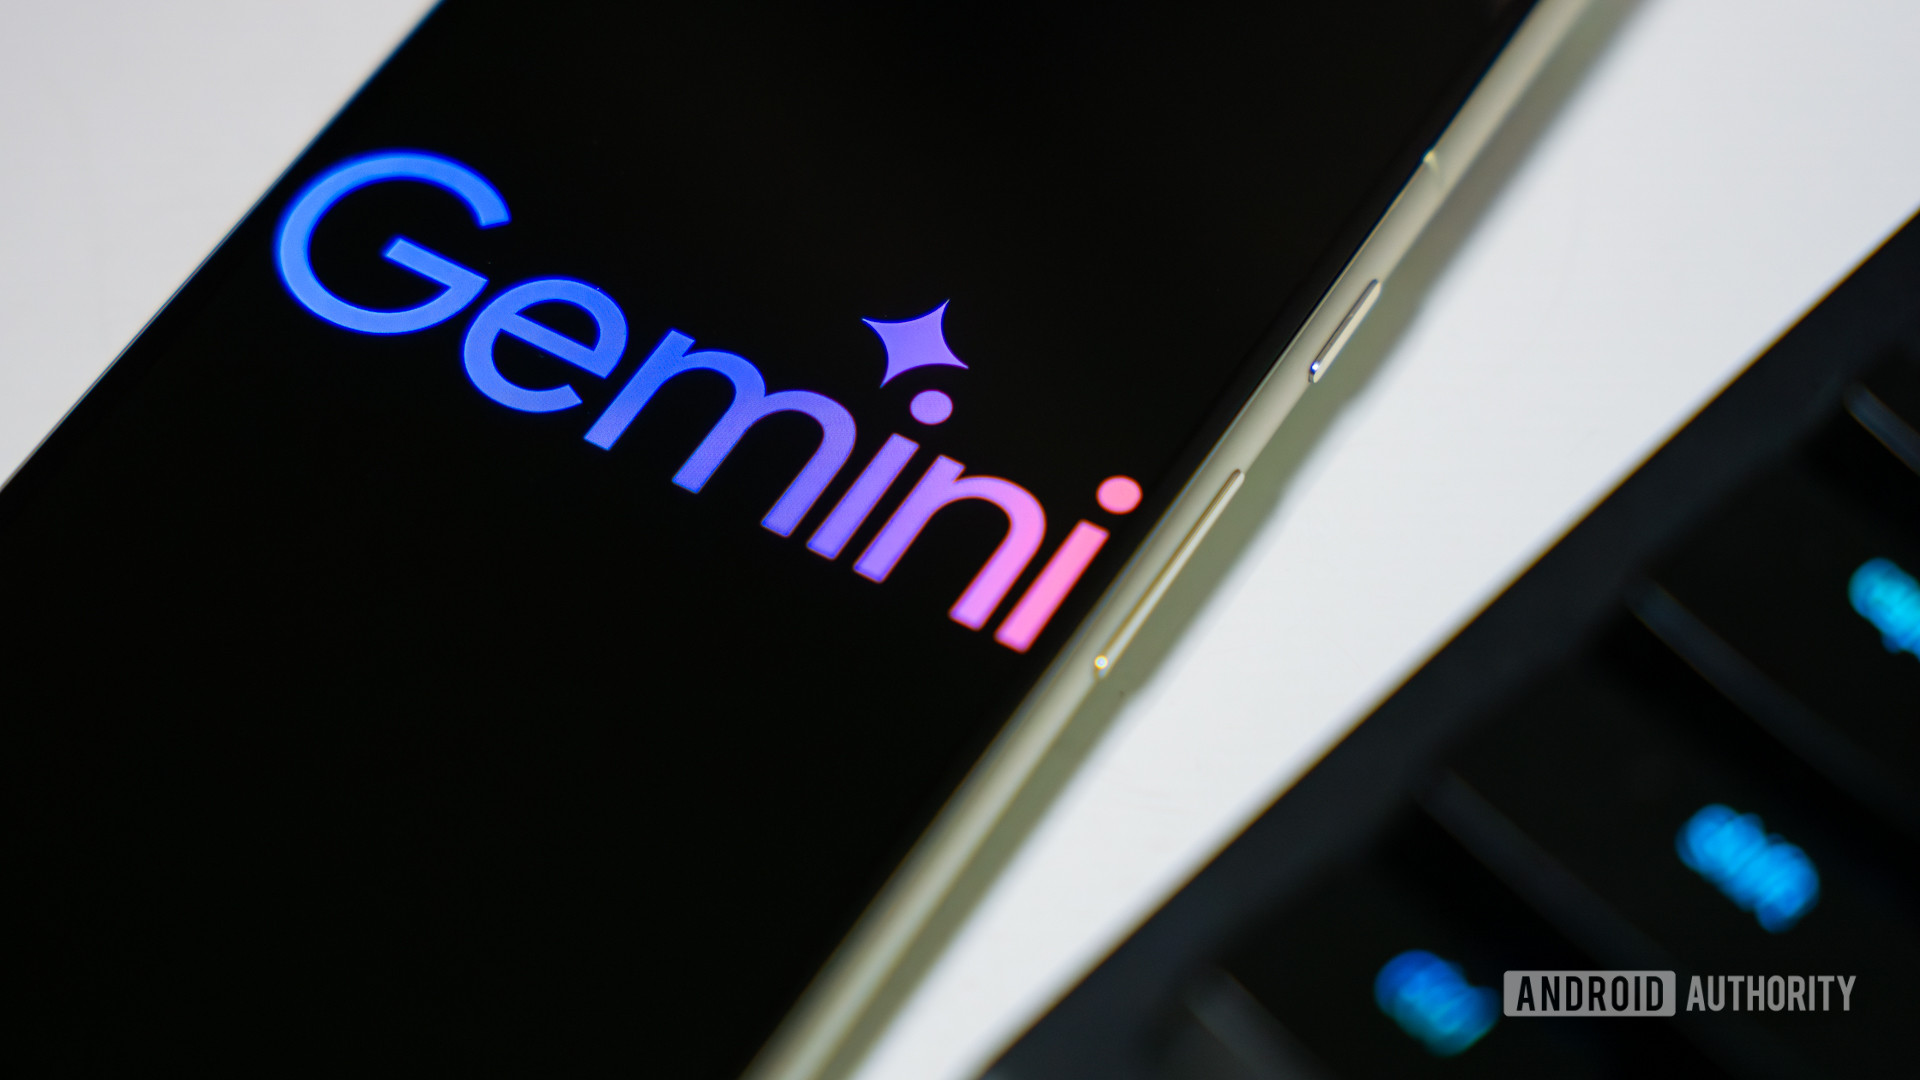 The Gemini app is getting a speed boost with ‘real-time responses’